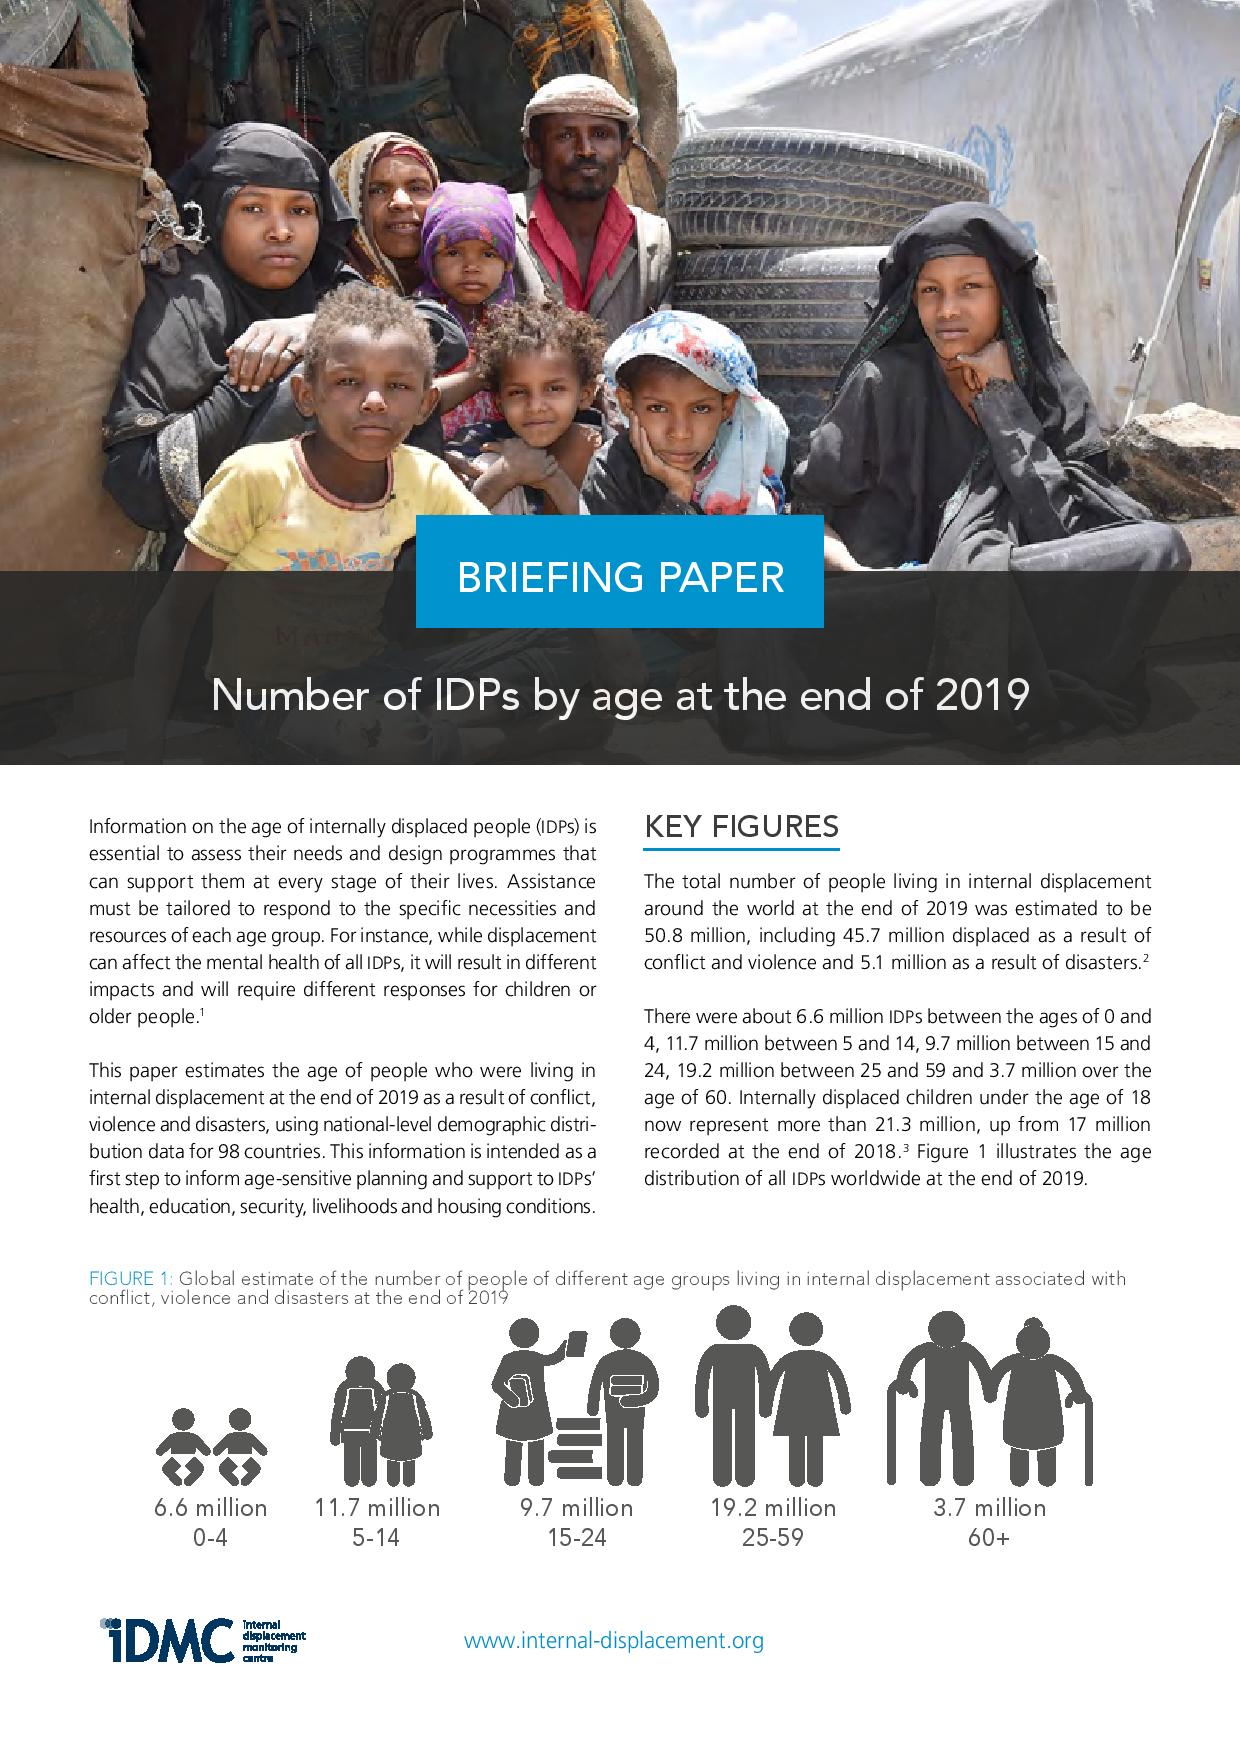 Number of IDPs by age at the end of 2019